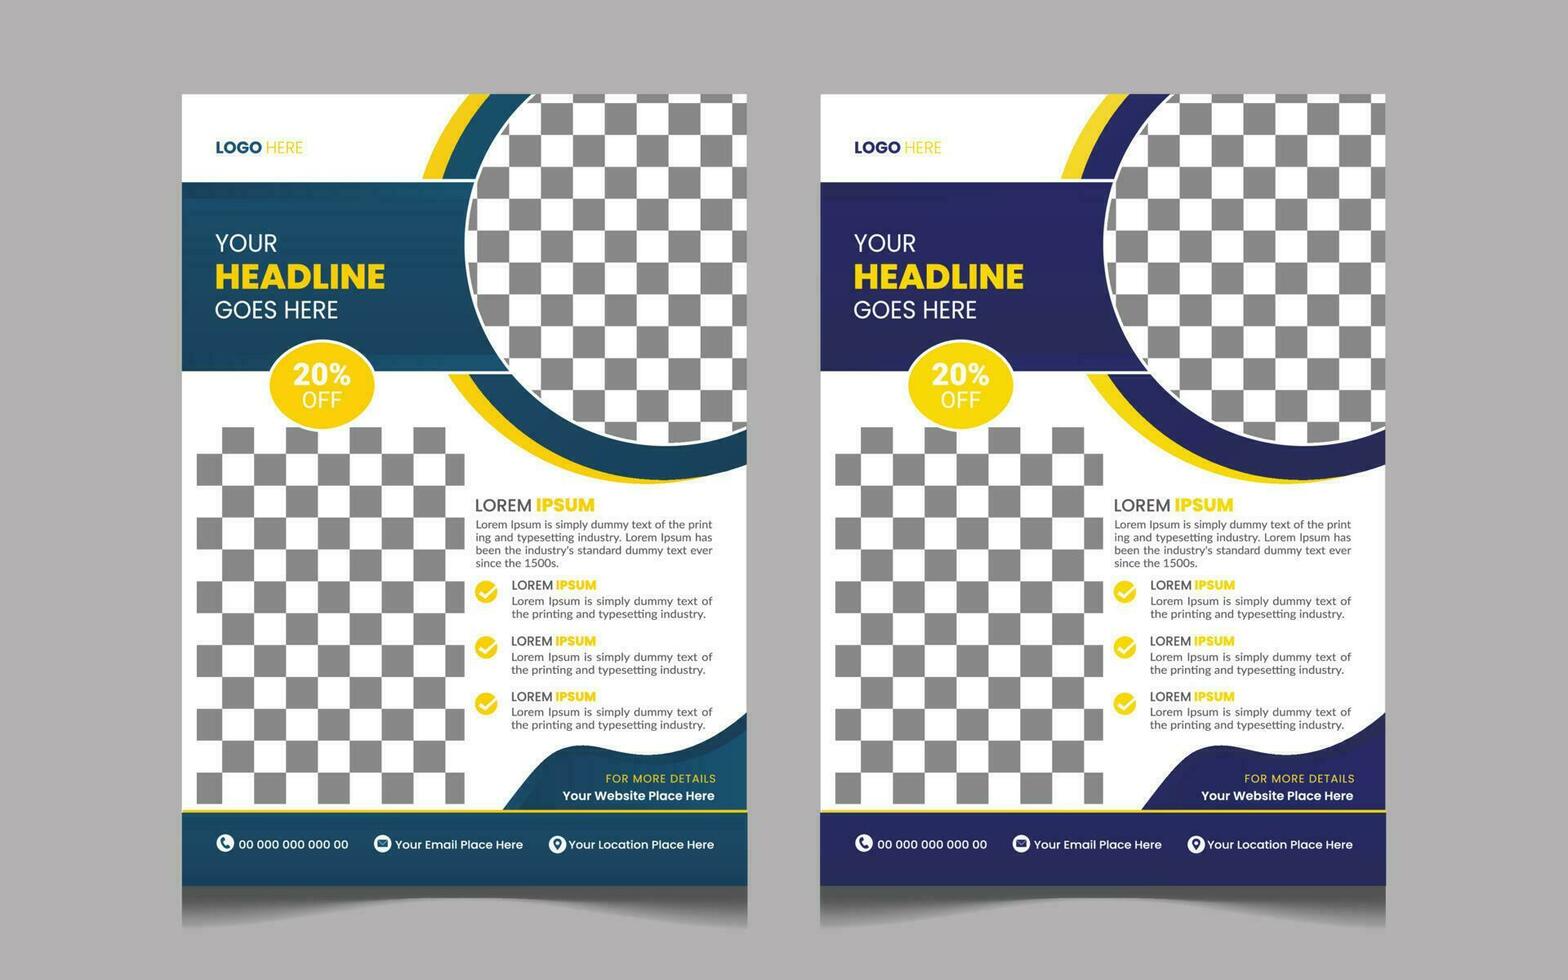 Admission Flyer Template in A4 Size, Flyer design for Education and Admission vector